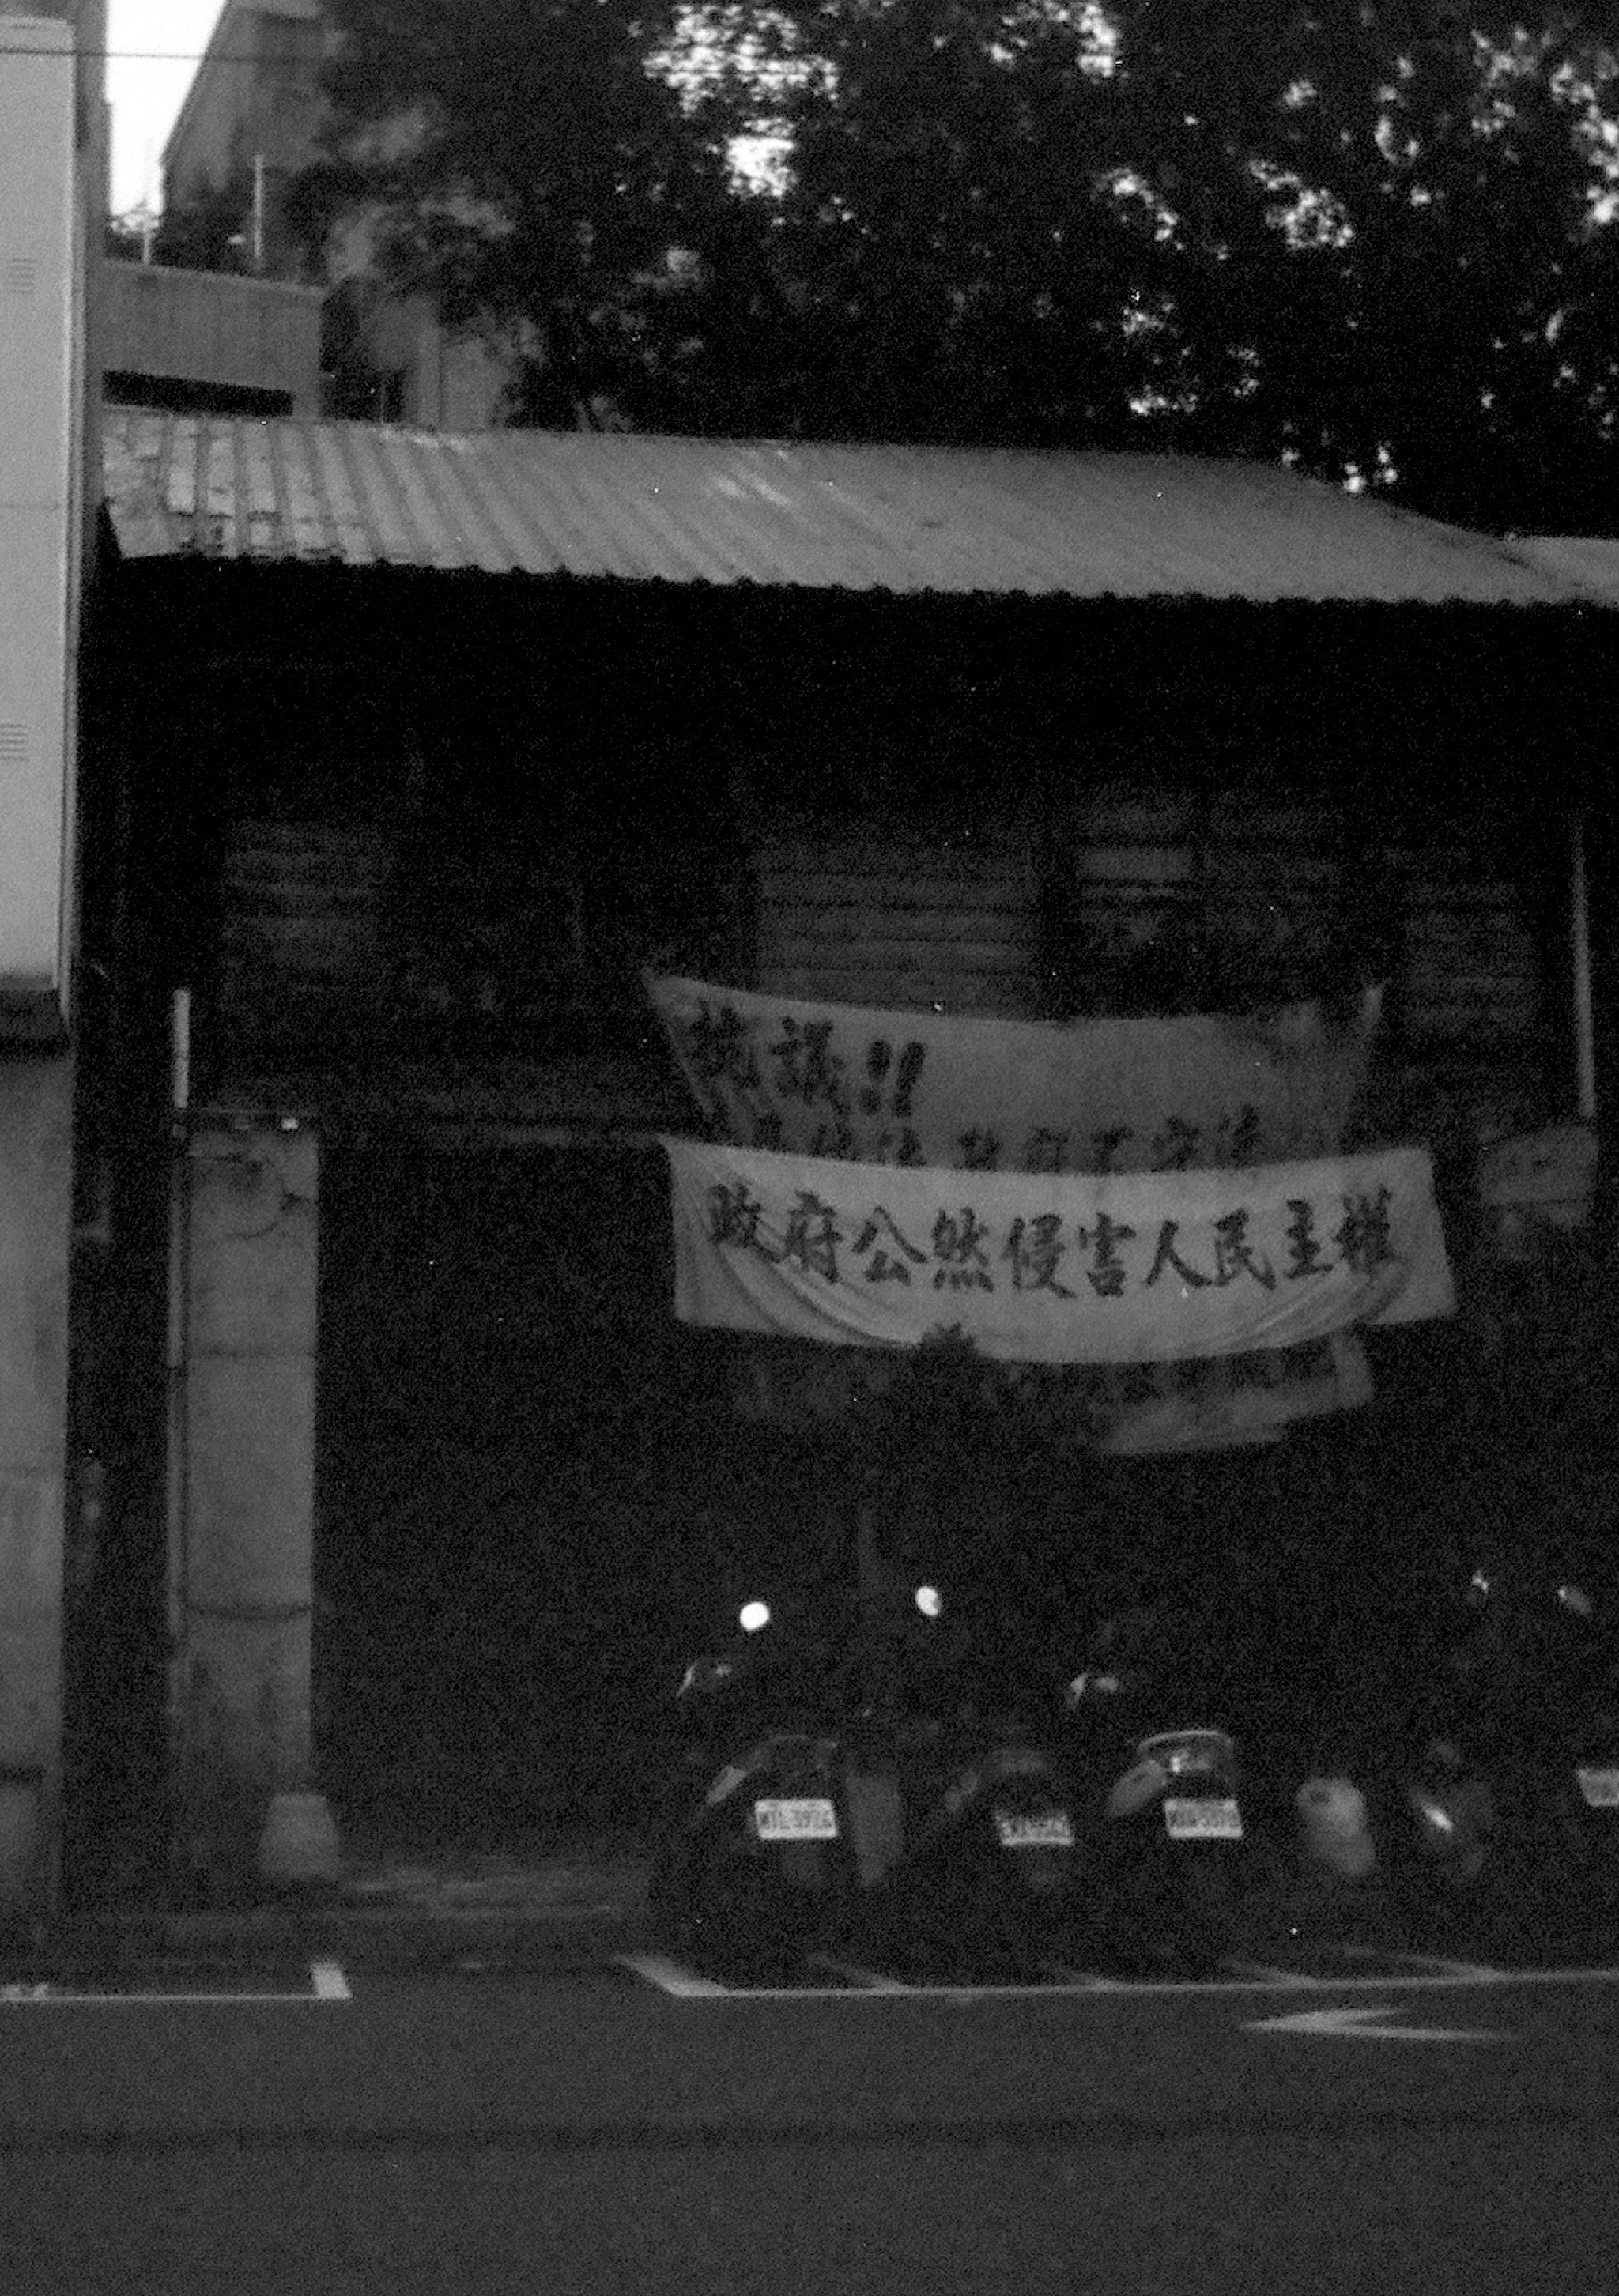 An old, run down building with banners reading 'Protest! The government is attaching civil rights.